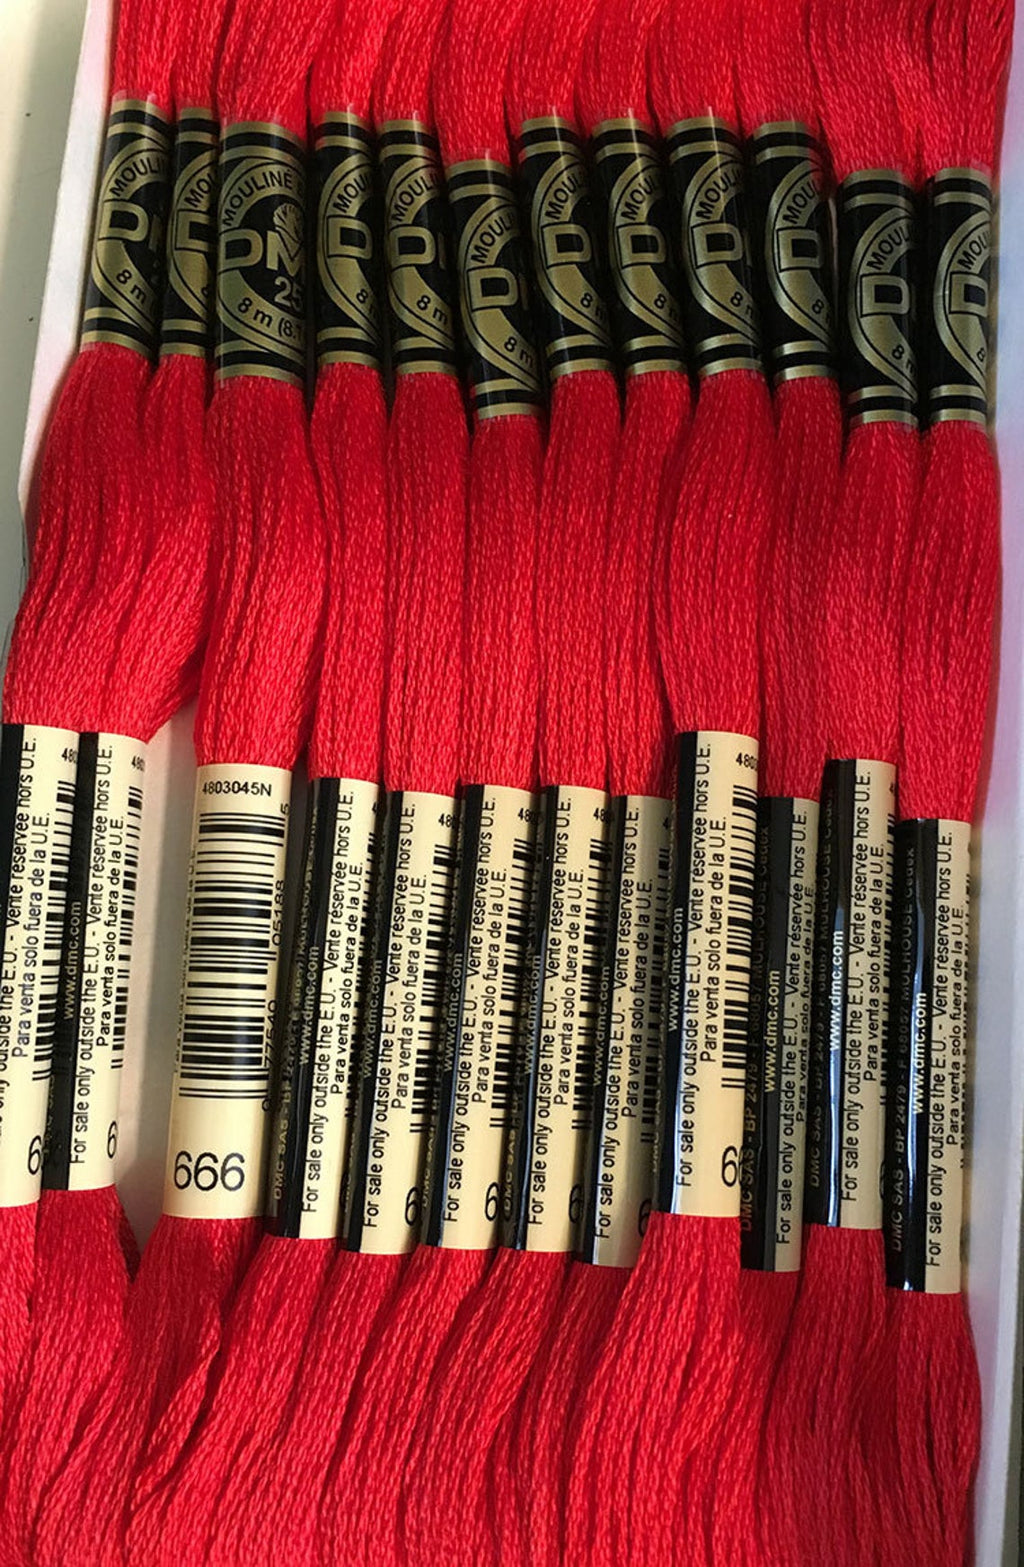 DMC 6 Strand Embroidery Floss Cotton Thread Bulk 666 Bright Christmas Red 8.7 Yards 12 Skeins